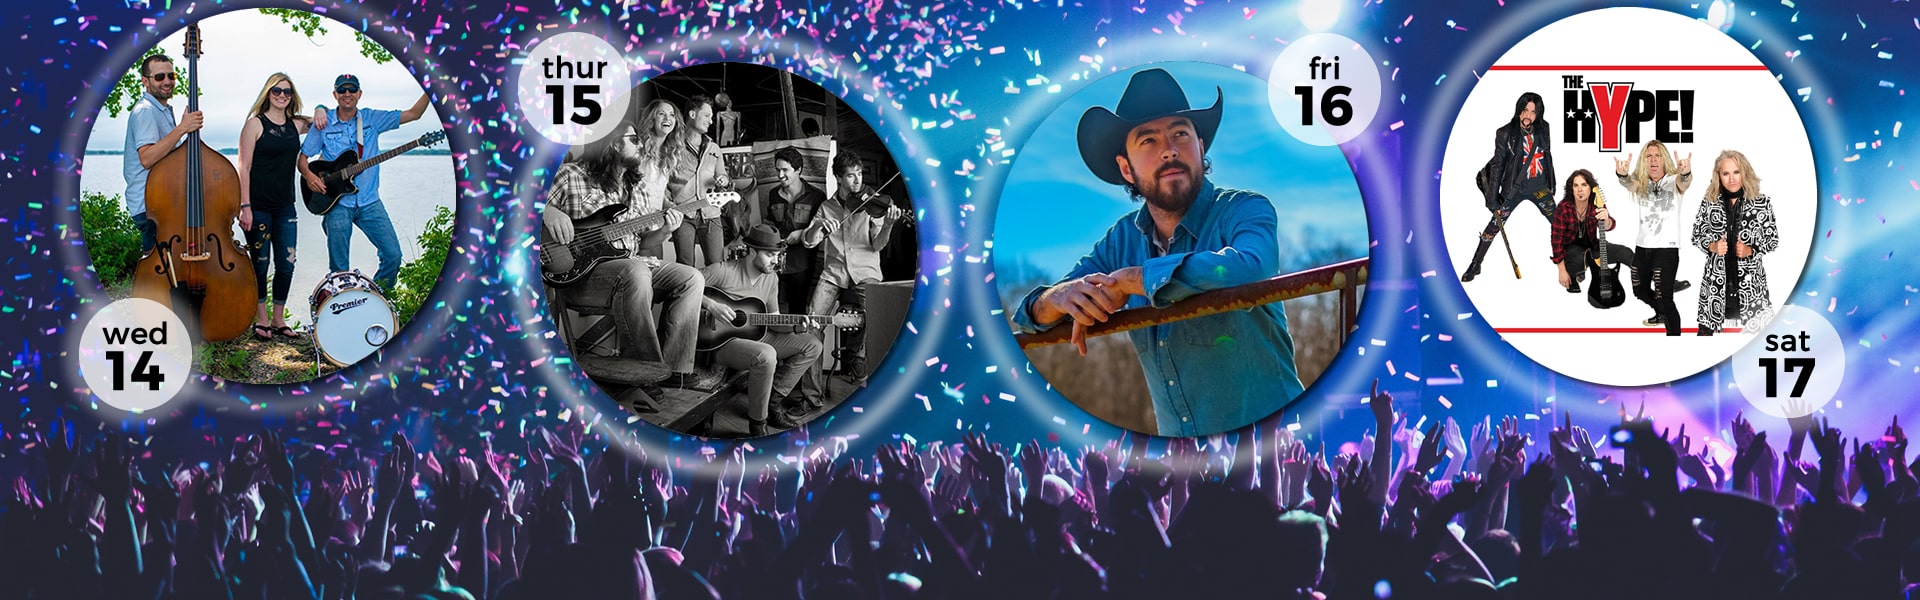 Free Concerts at the Hoop Barn! Ragtown on August 14; Maiden Dixie on August 15; Conner Sweet on August 16 and The Hype of August 17. Click to learn more!